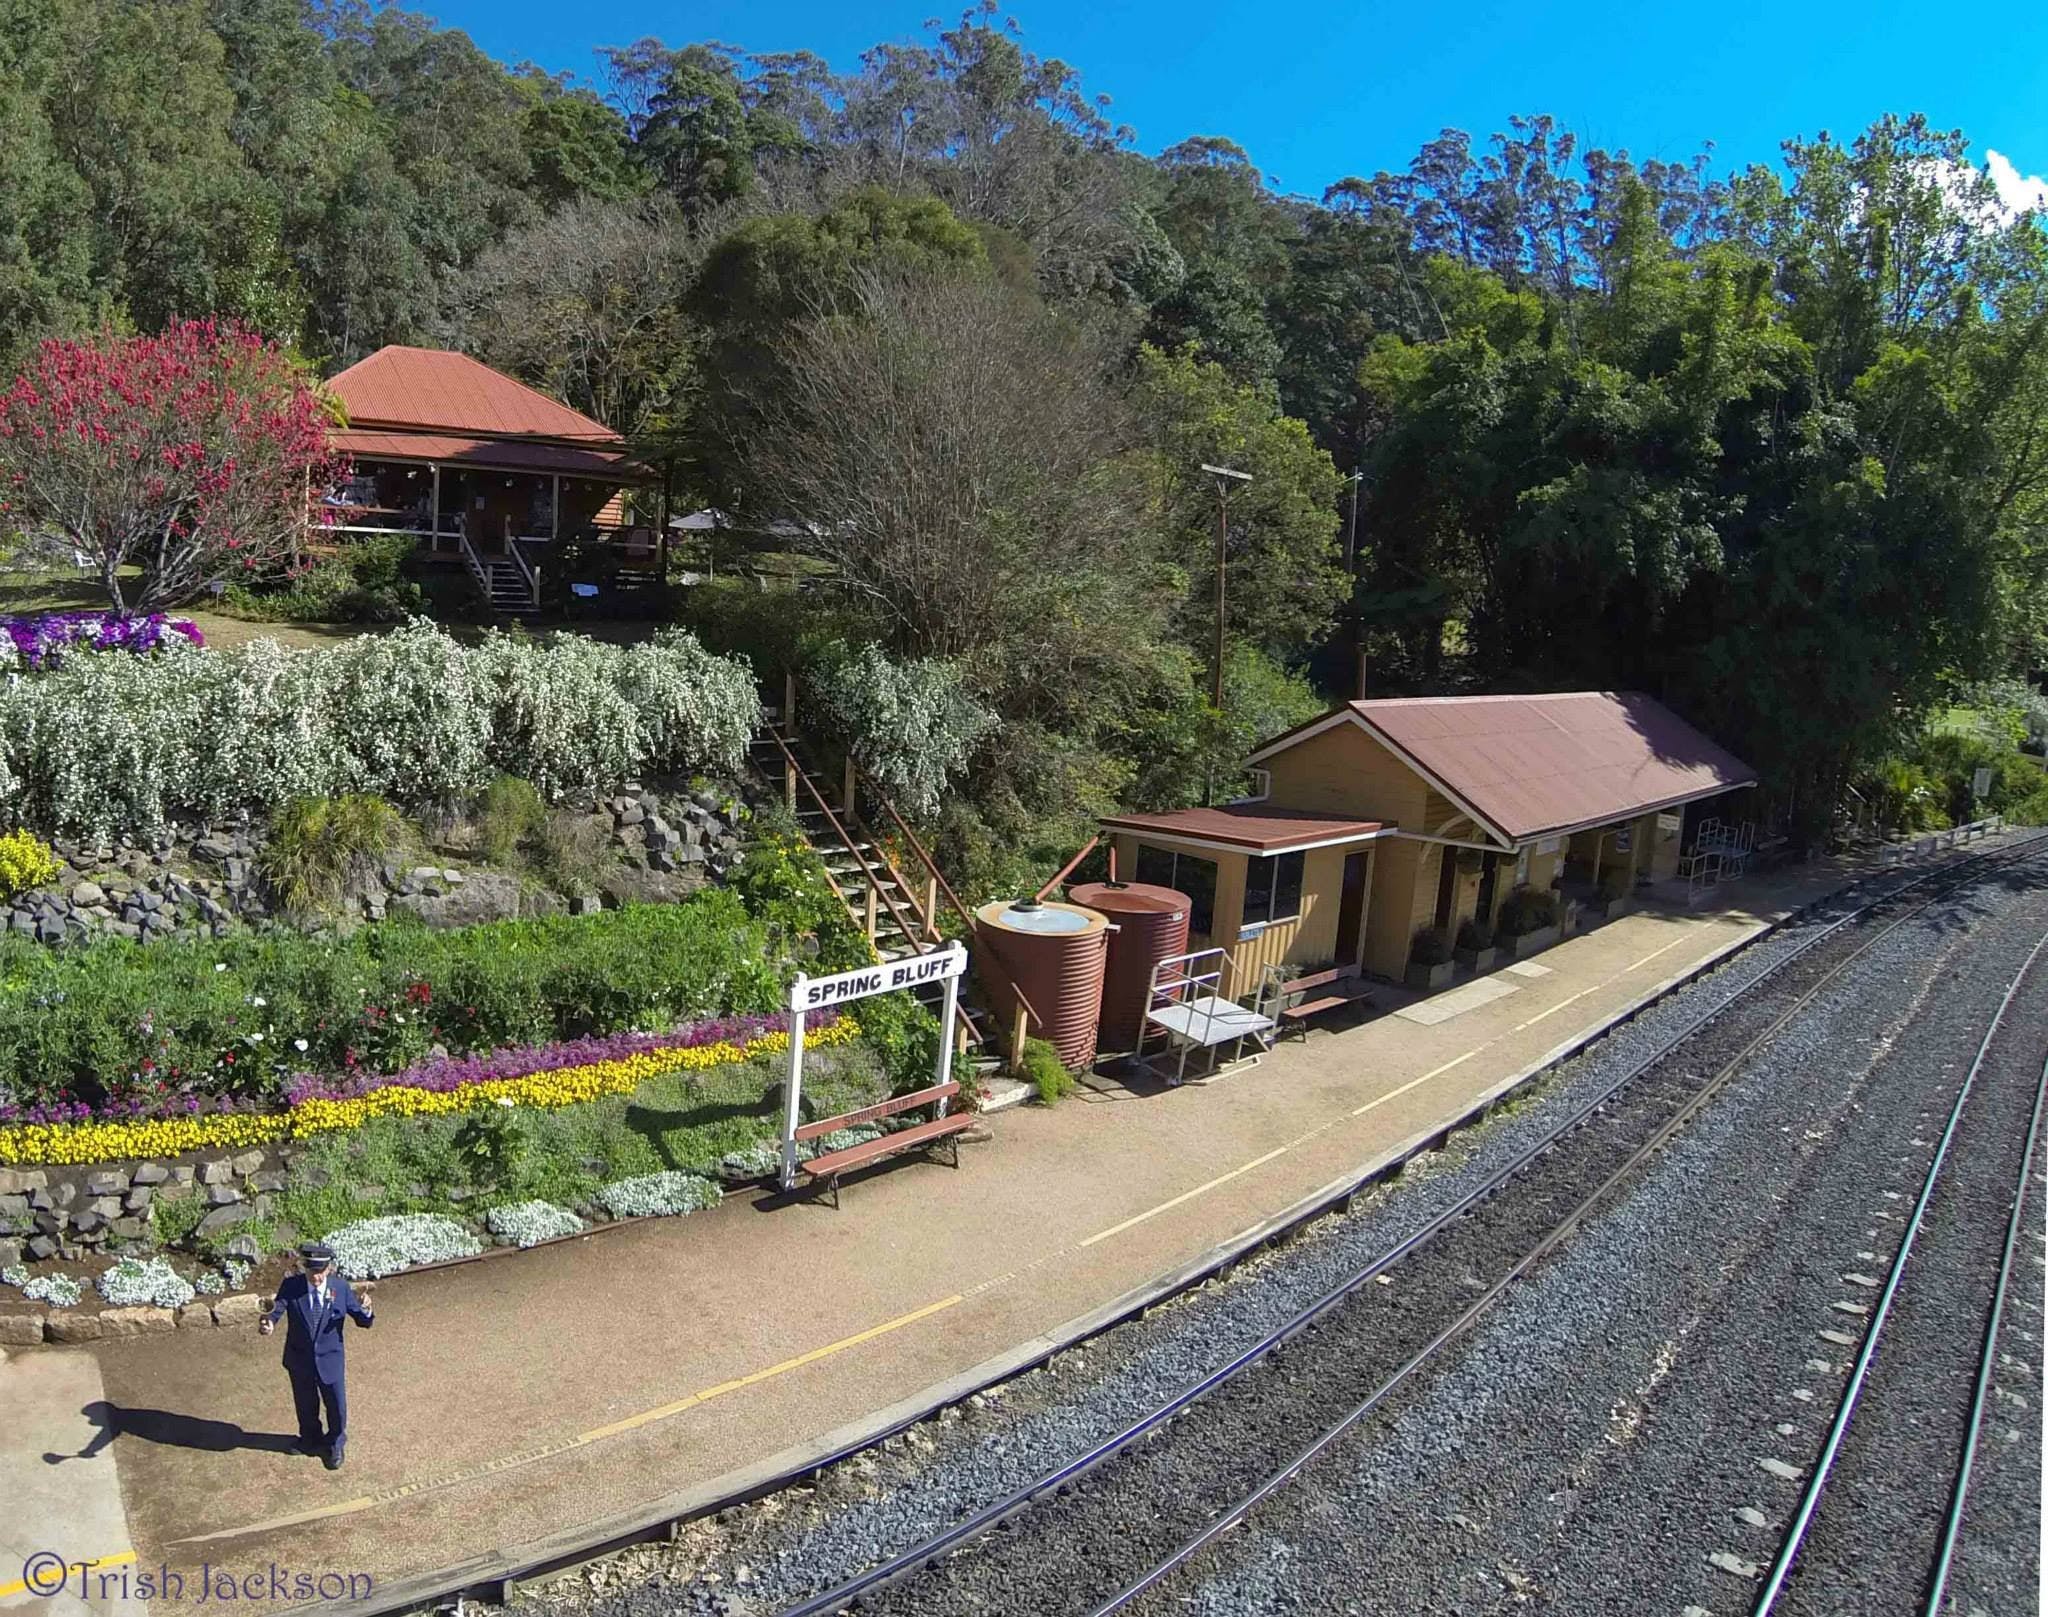 Spring Bluff Railway Station - Find Attractions